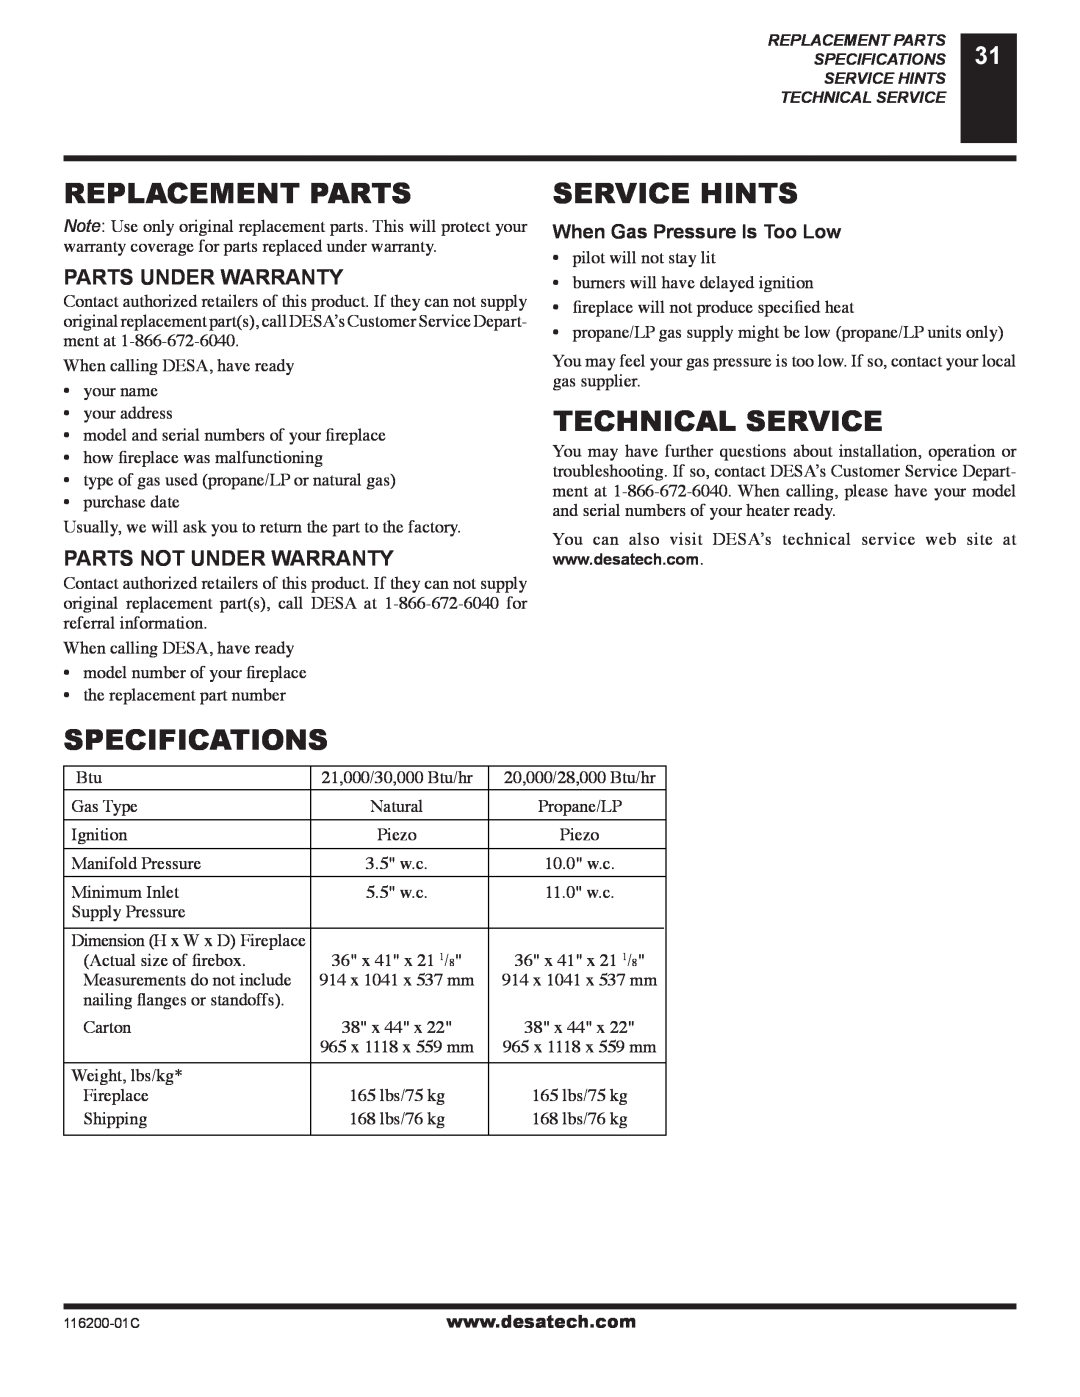 Desa (V)VC36P, CGCDV36NR Replacement Parts, Service Hints, Technical Service, Specifications, Parts Under Warranty 